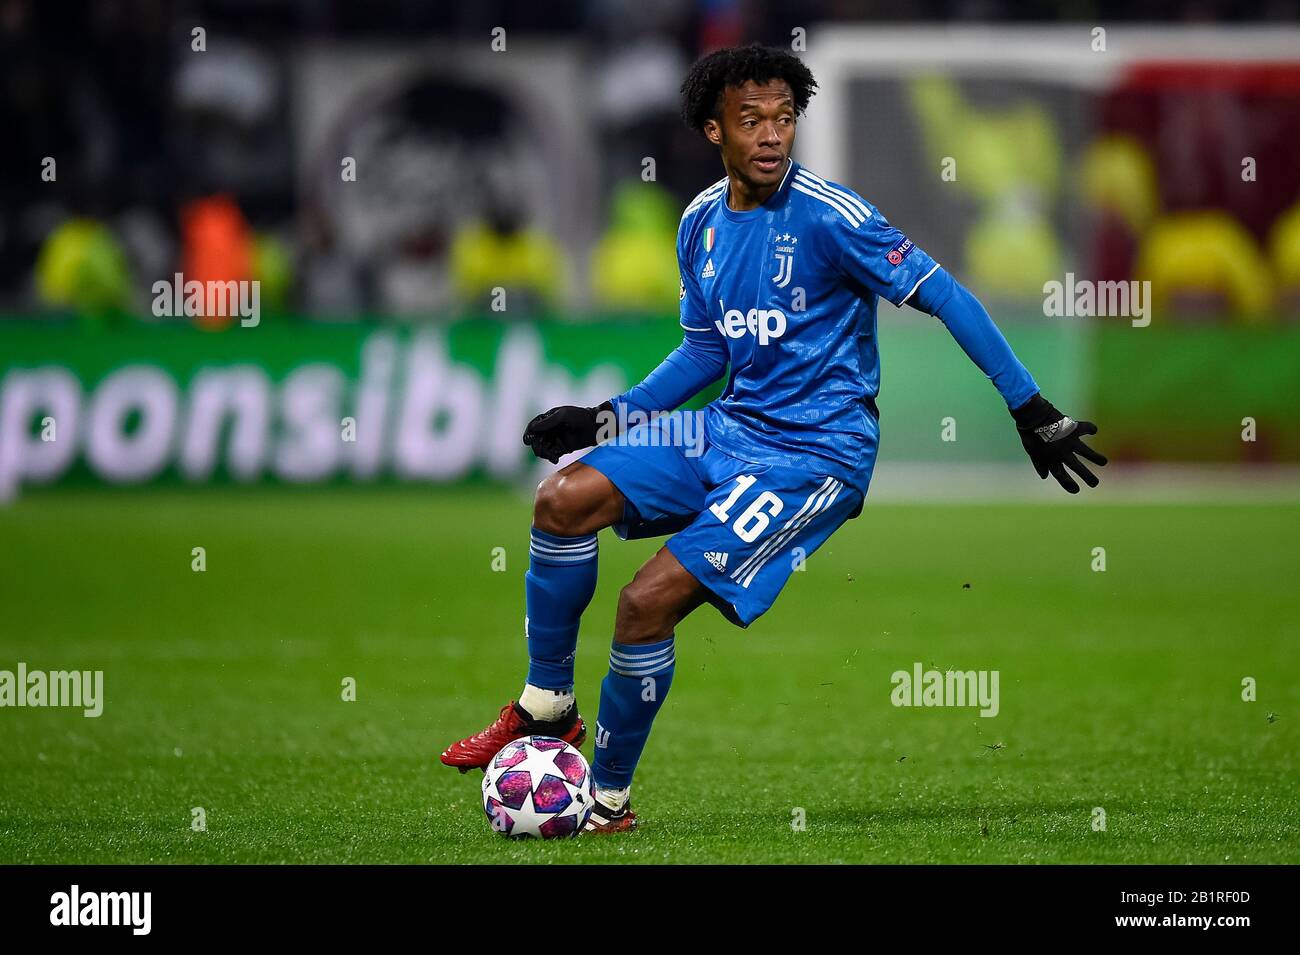 Lyon, Italy. 26th Feb, 2020. LYON, ITALY - February 26, 2020: Juan Cuadrado  of Juventus FC in action during the UEFA Champions League round of 16 first  leg football match between Olympique